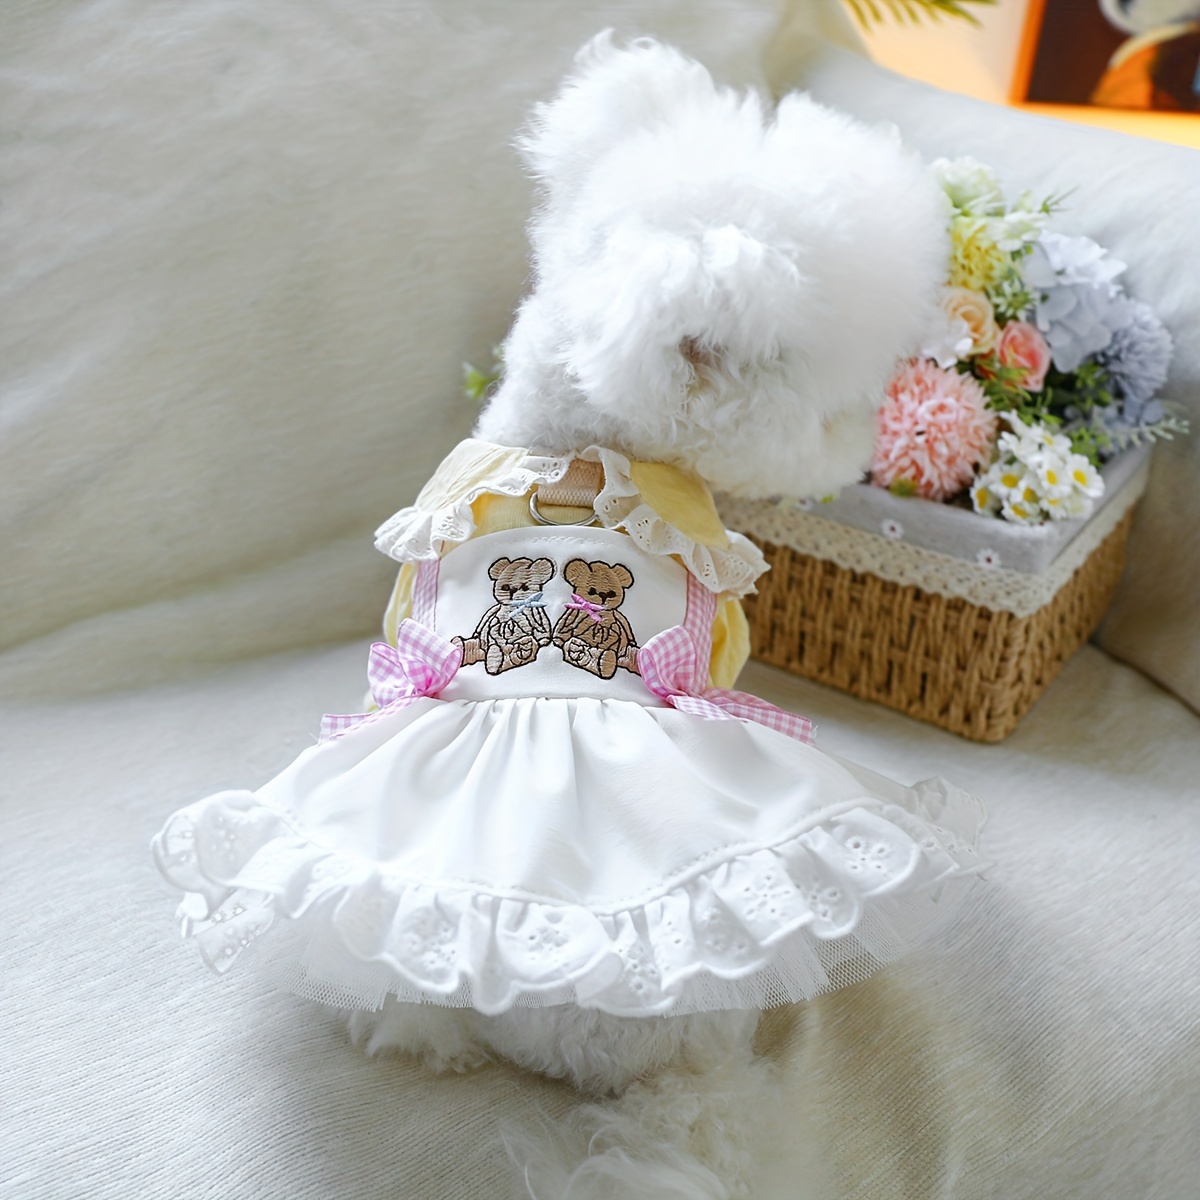 

1pc Pet Dress With Cute Teddy Bears Design, Lace Princess Skirt For Dogs, Spring Summer Fashion, Adorable Clothing, Pet Outfit